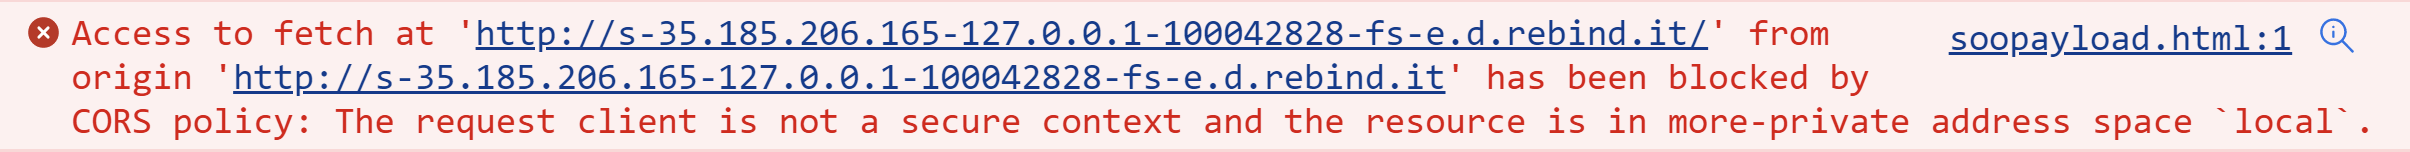 Chrome developer console message: Access to fetch at 'http://s-35.185.206.165-127.0.0.1-100042828-fs-e.d.rebind.it/' from origin 'http://s-35.185.206.165-127.0.0.1-100042828-fs-e.d.rebind.it' has been blocked by CORS policy: The request client is not a secure context and the resource is in more-private address space `local`.